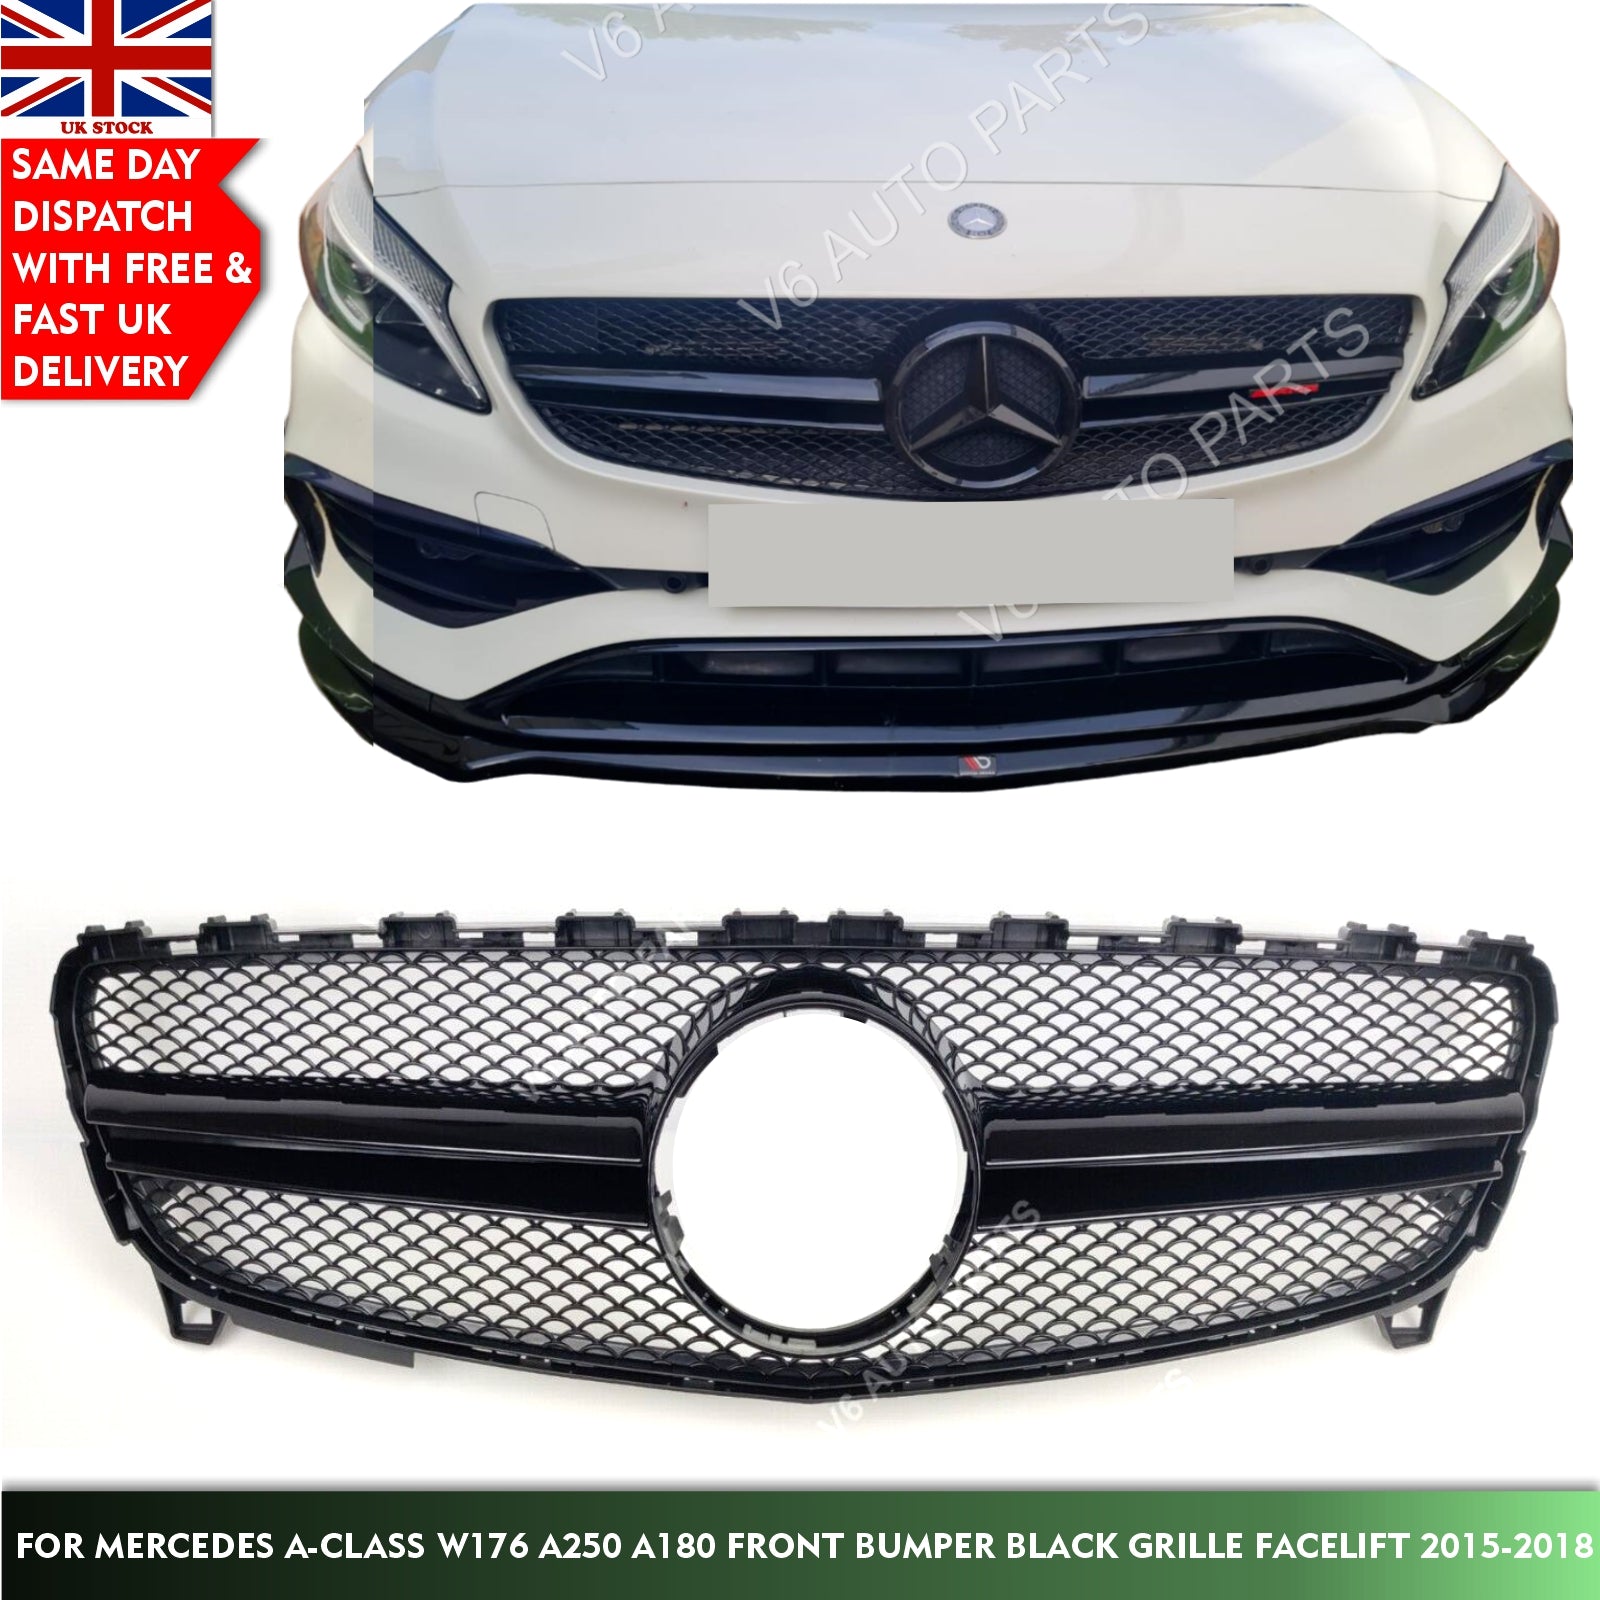 For Mercedes A-Class W176 A160 A45 A220 A250 Front Radiator Grille 2015-2018 AMG